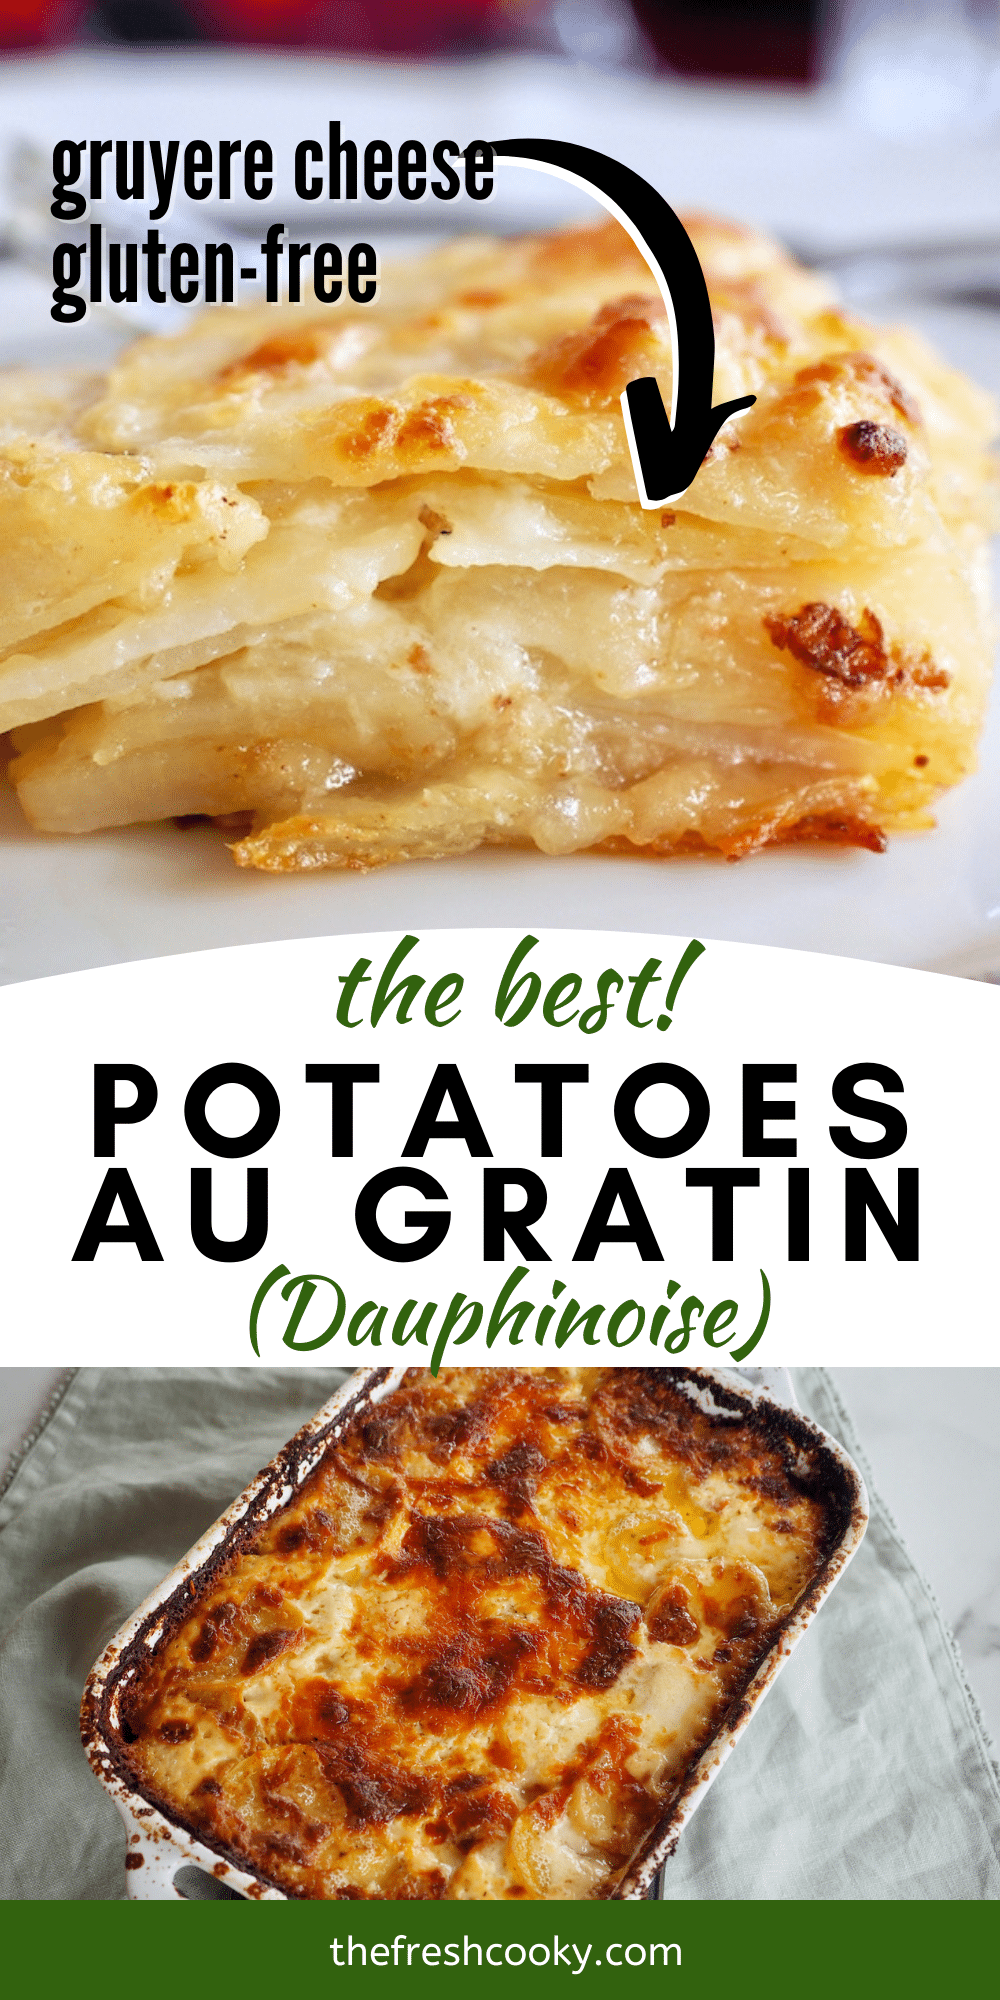 Long pin for potatoes au gratin or dauphinoise potatoes, with top image of slice of golden, bubbly cheesy gratin potatoes, bottom image of casserole dish filled with cheesy potatoes.